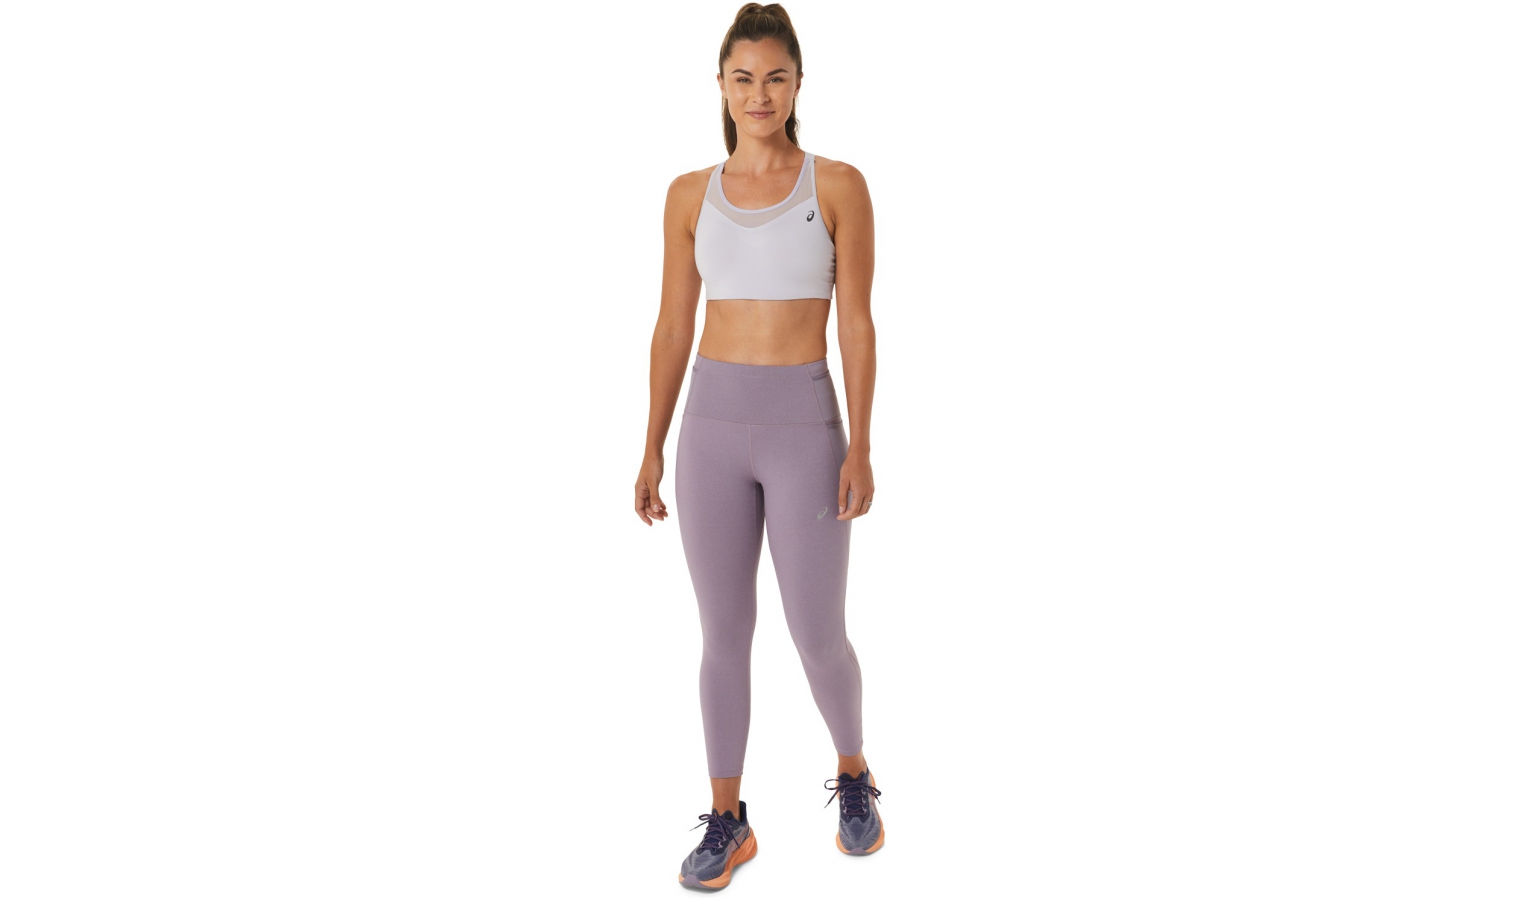 Enamor Dry Fit, High Waist Legging | Seamless Workout Legging With Per